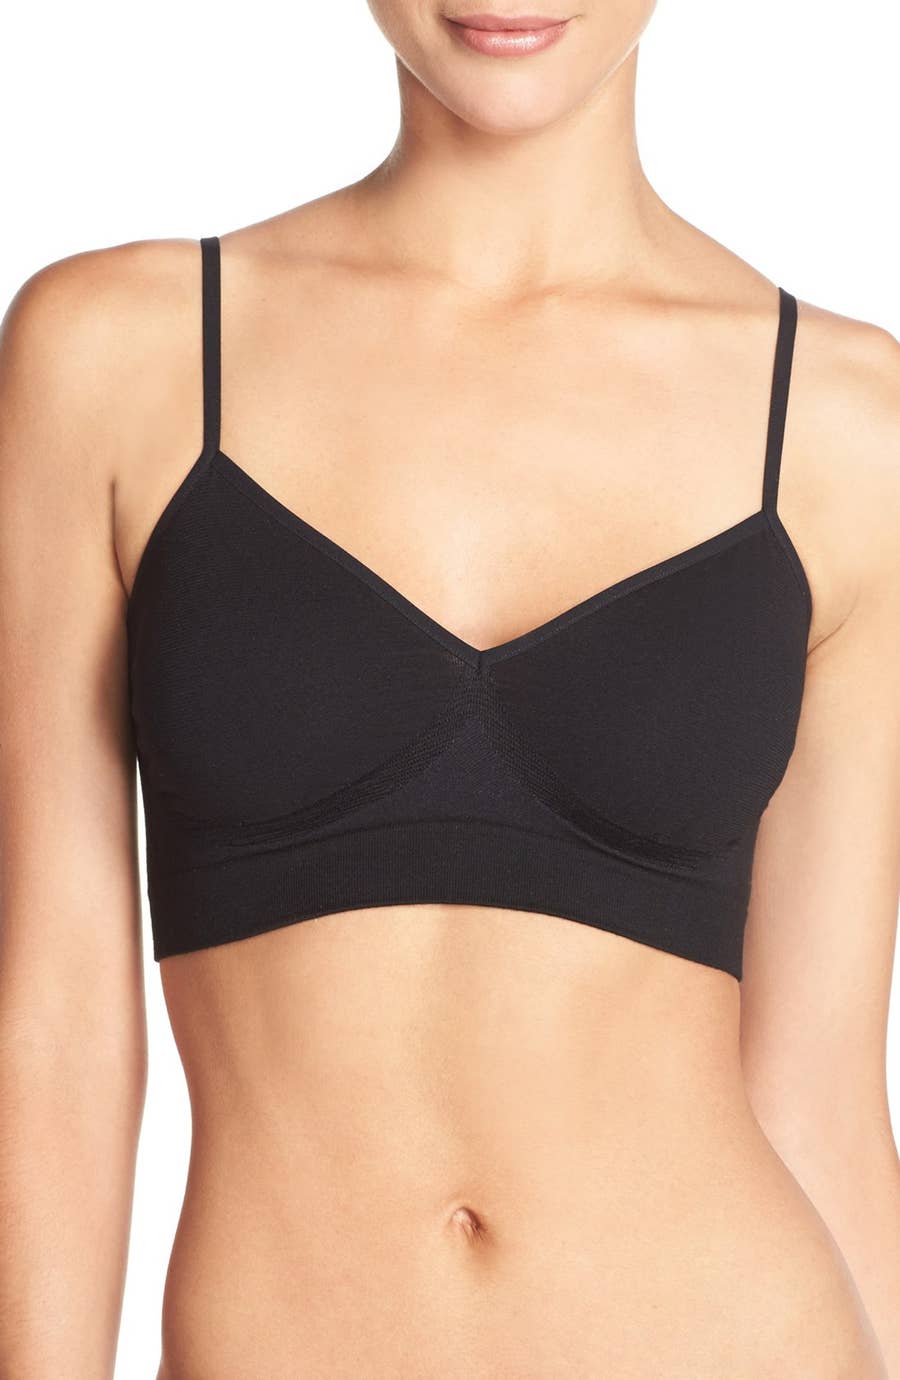 Cacique Black Full Coverage Underwired T Shirt Bra Size 40C - $15 - From  Jackie